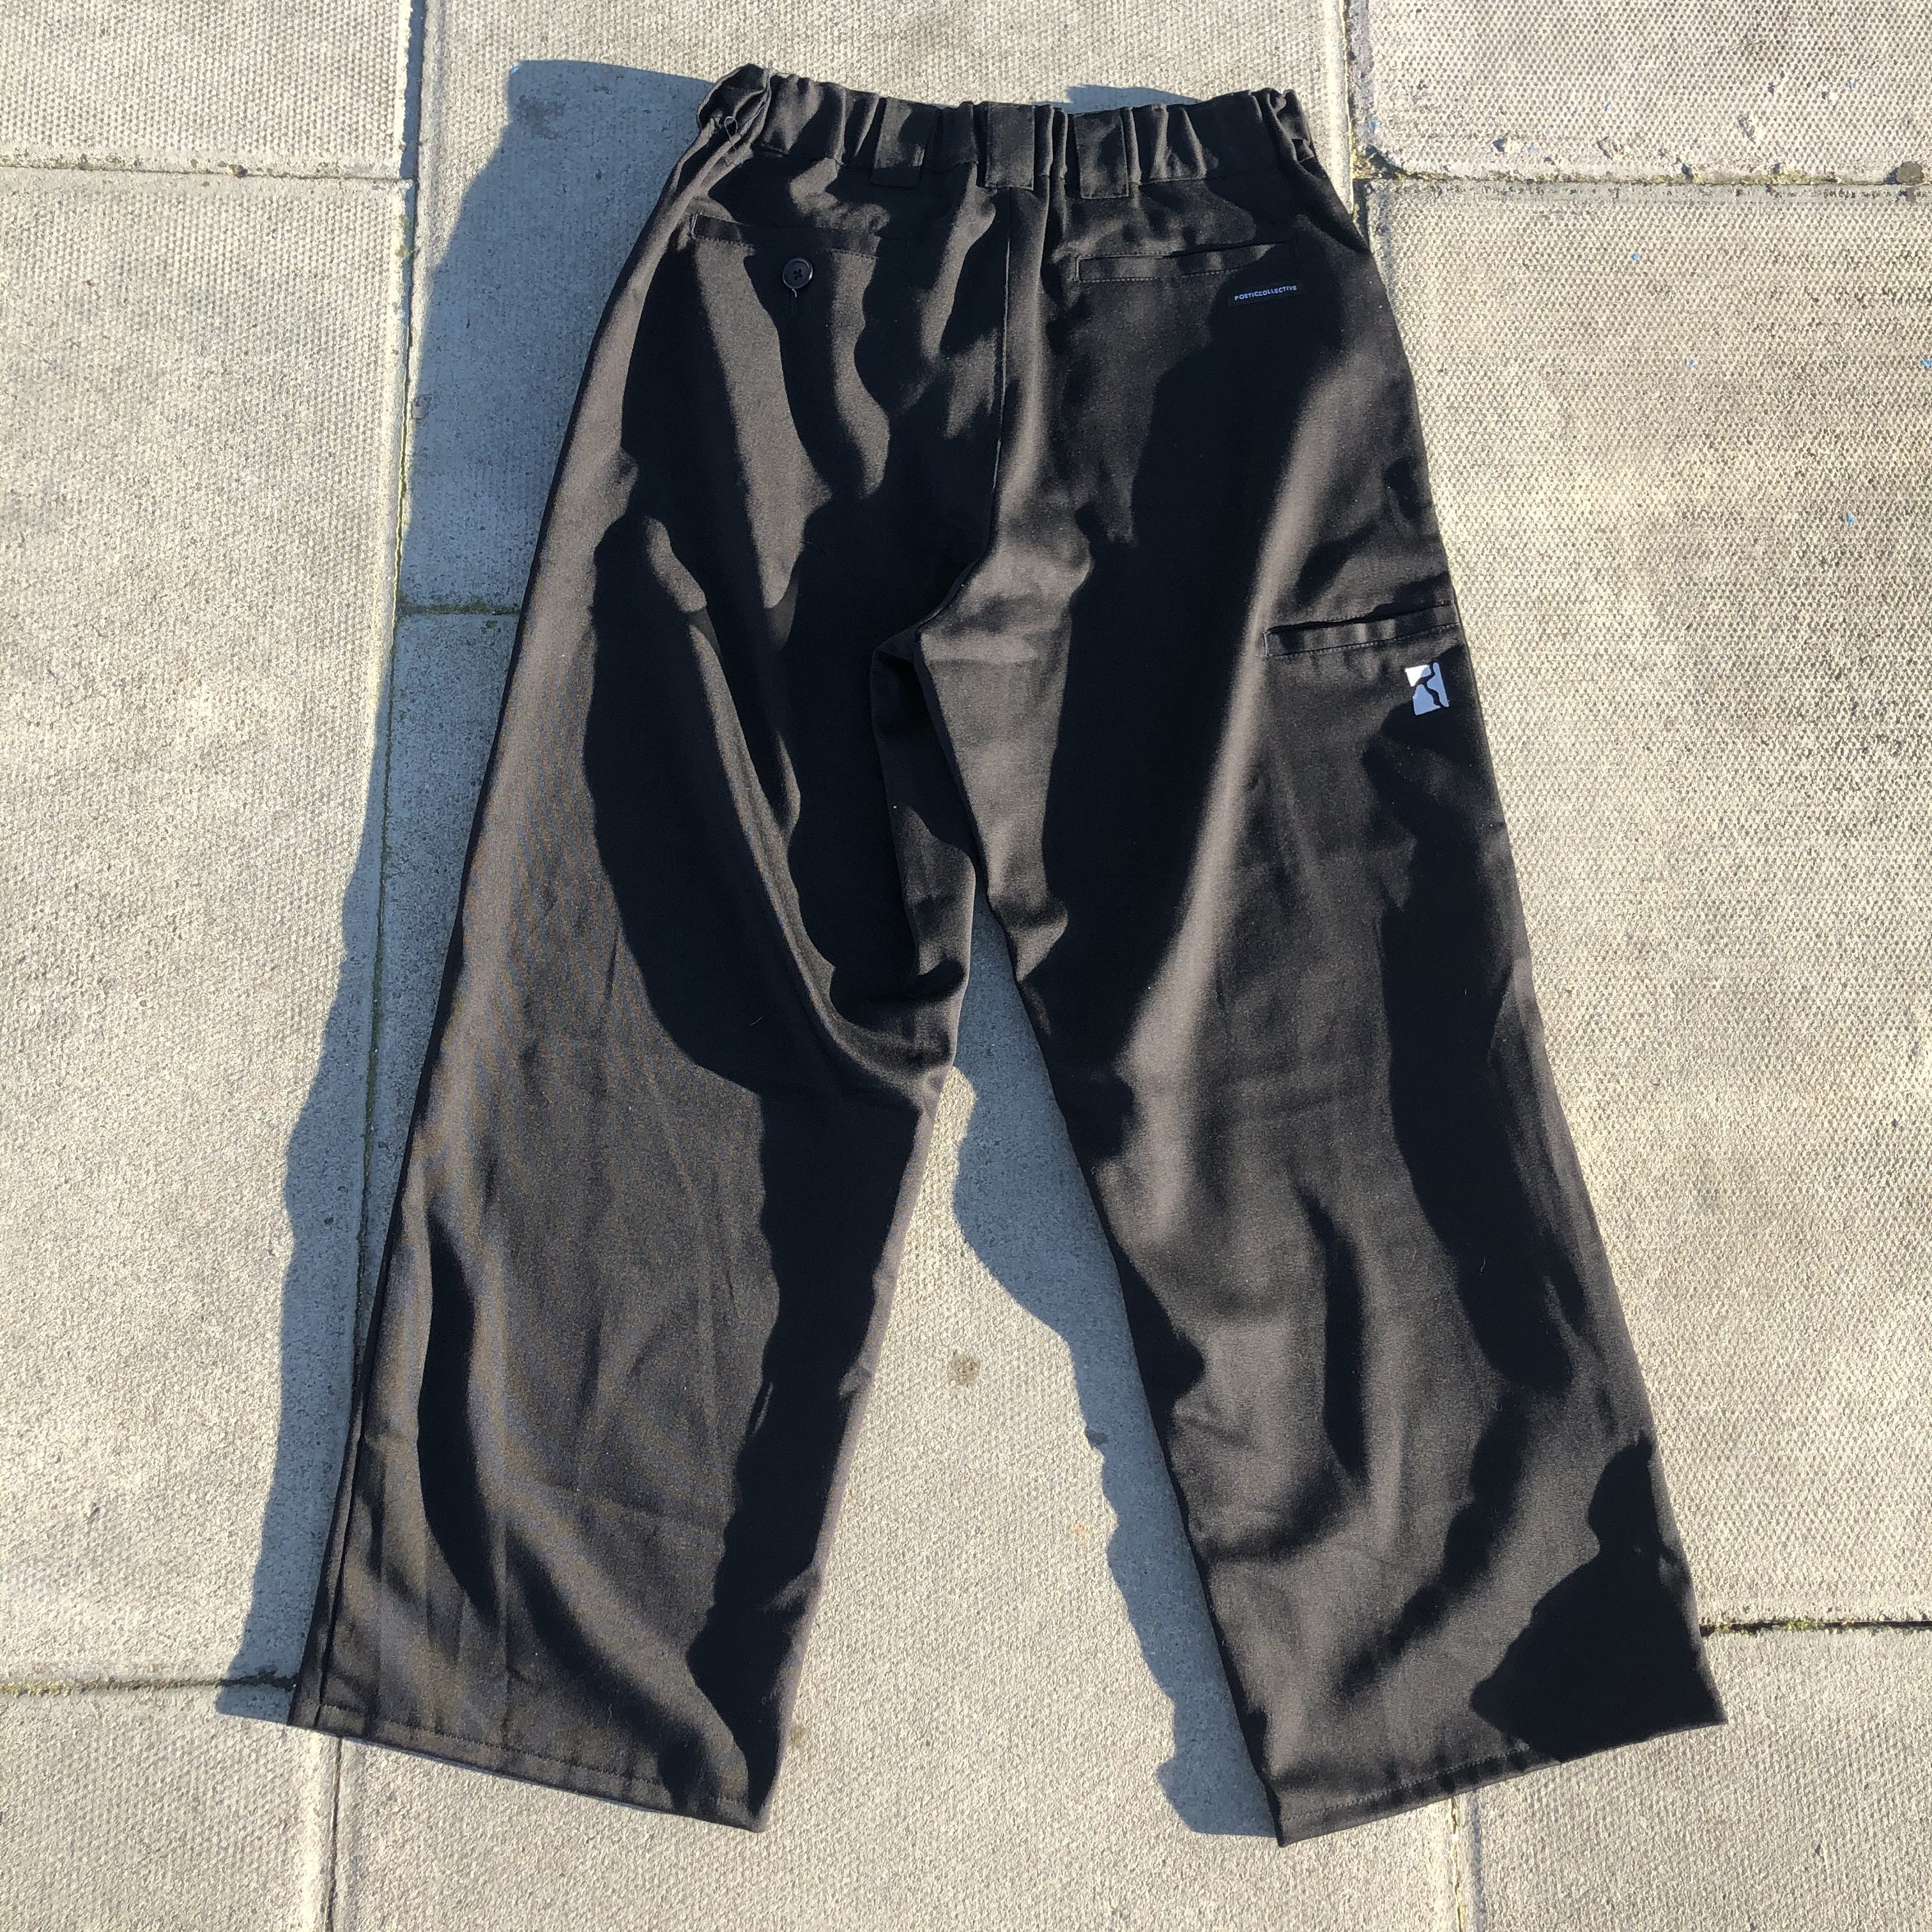 Poetic Collective Painter Pants Black Available at Skate Pharm